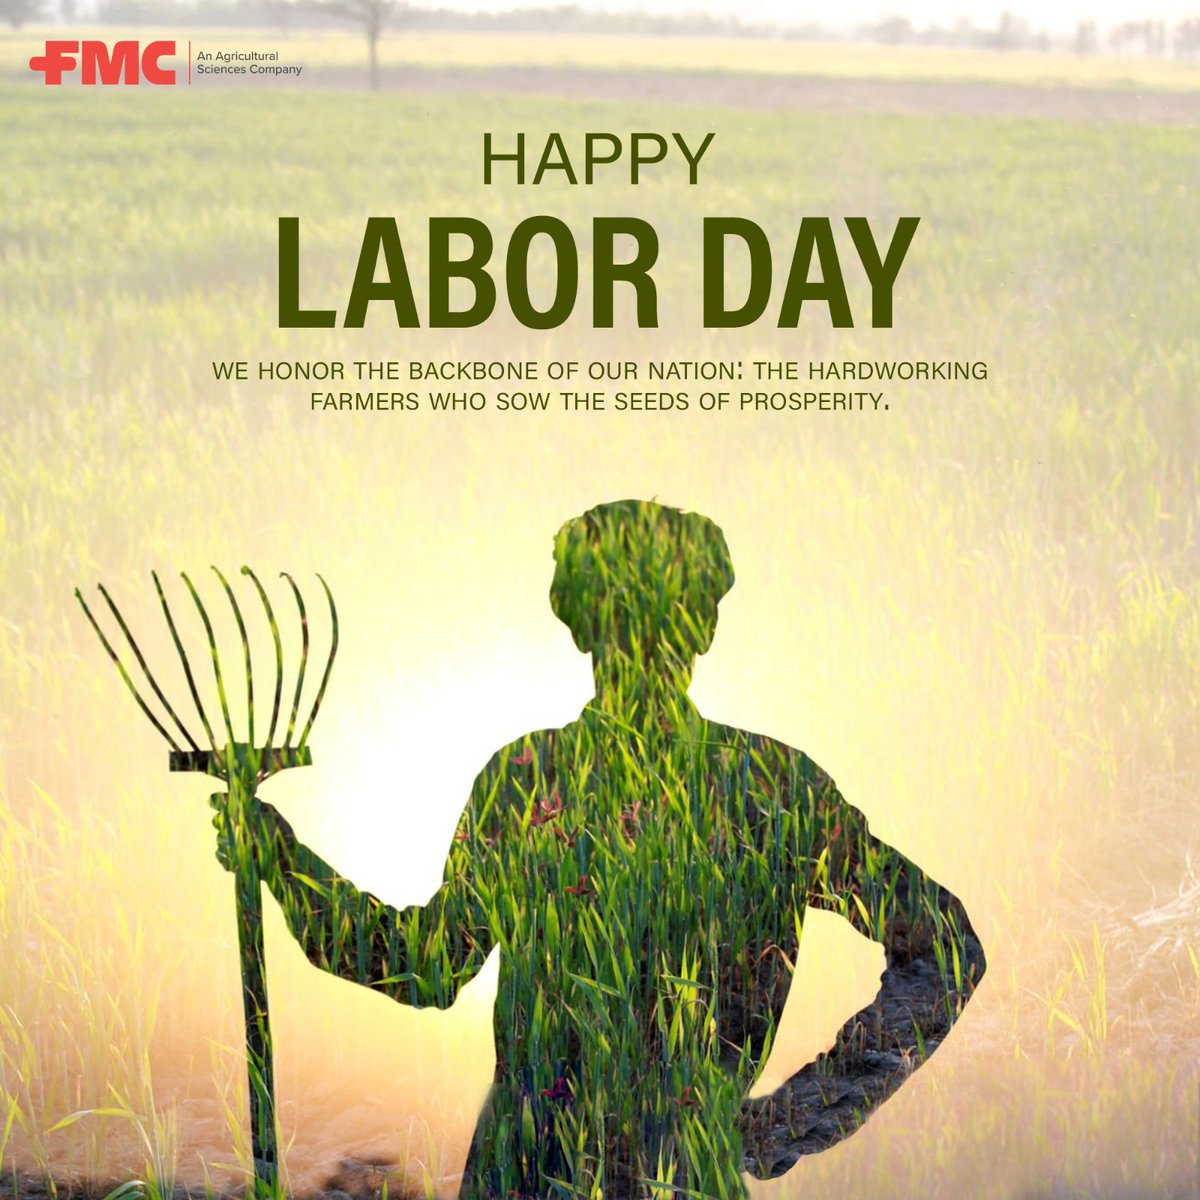 Today, we salute the tireless dedication of our farmers who work relentlessly to feed the world. Happy Labor Day to those who cultivate our fields and nourish our communities! 🌾🚜

#FMC #Pakistan #FarmersLaborDay #FeedingTheWorld #Gratitude